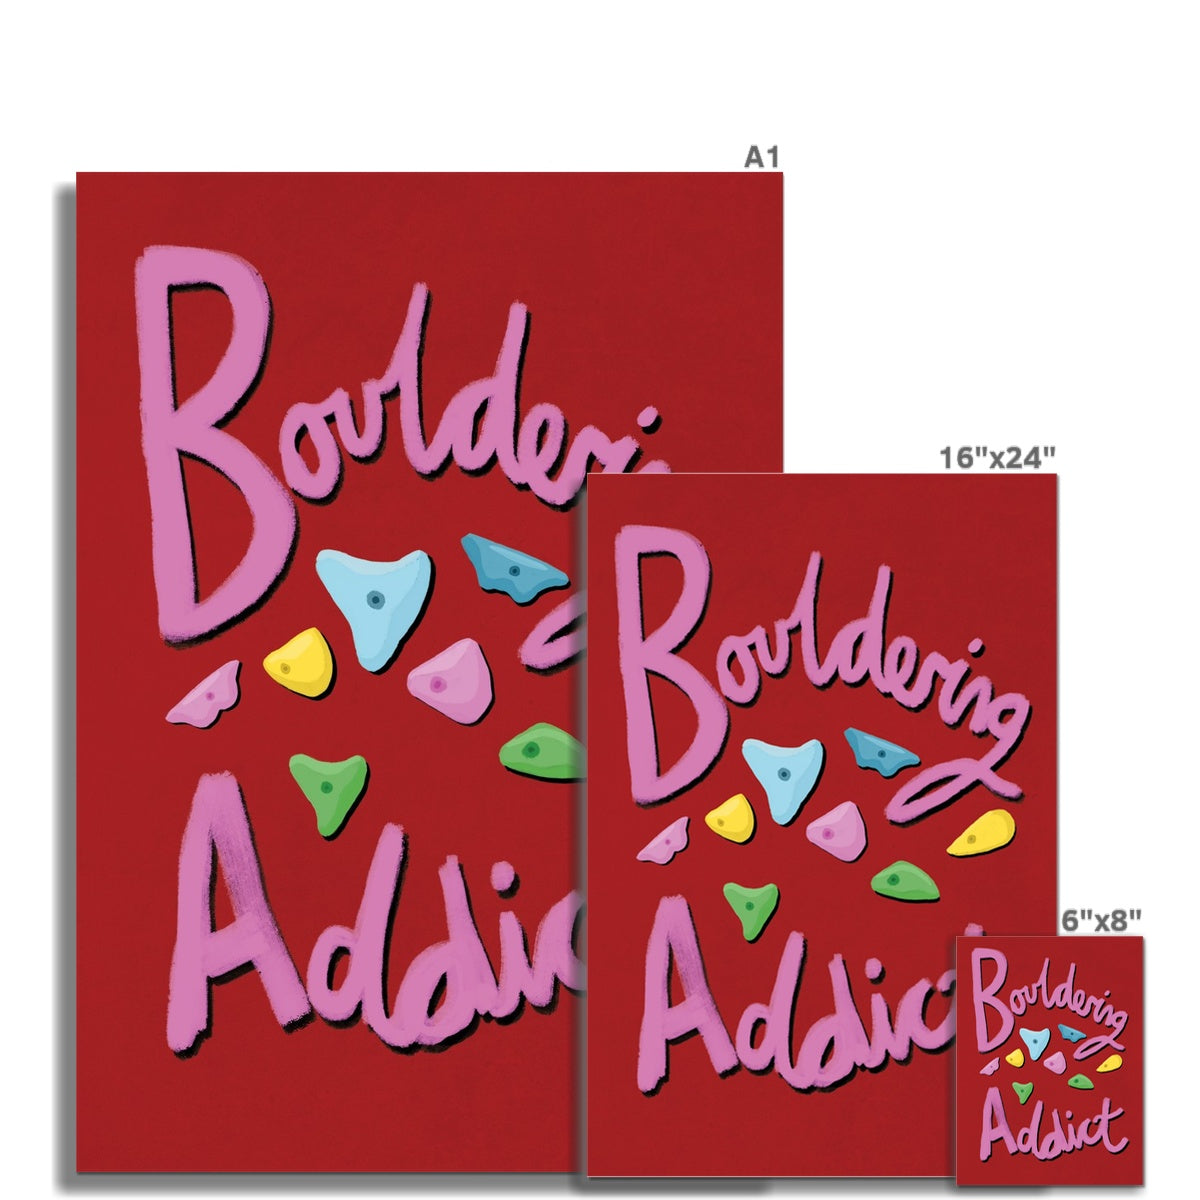 Bouldering Addict - Red and Pink Fine Art Print